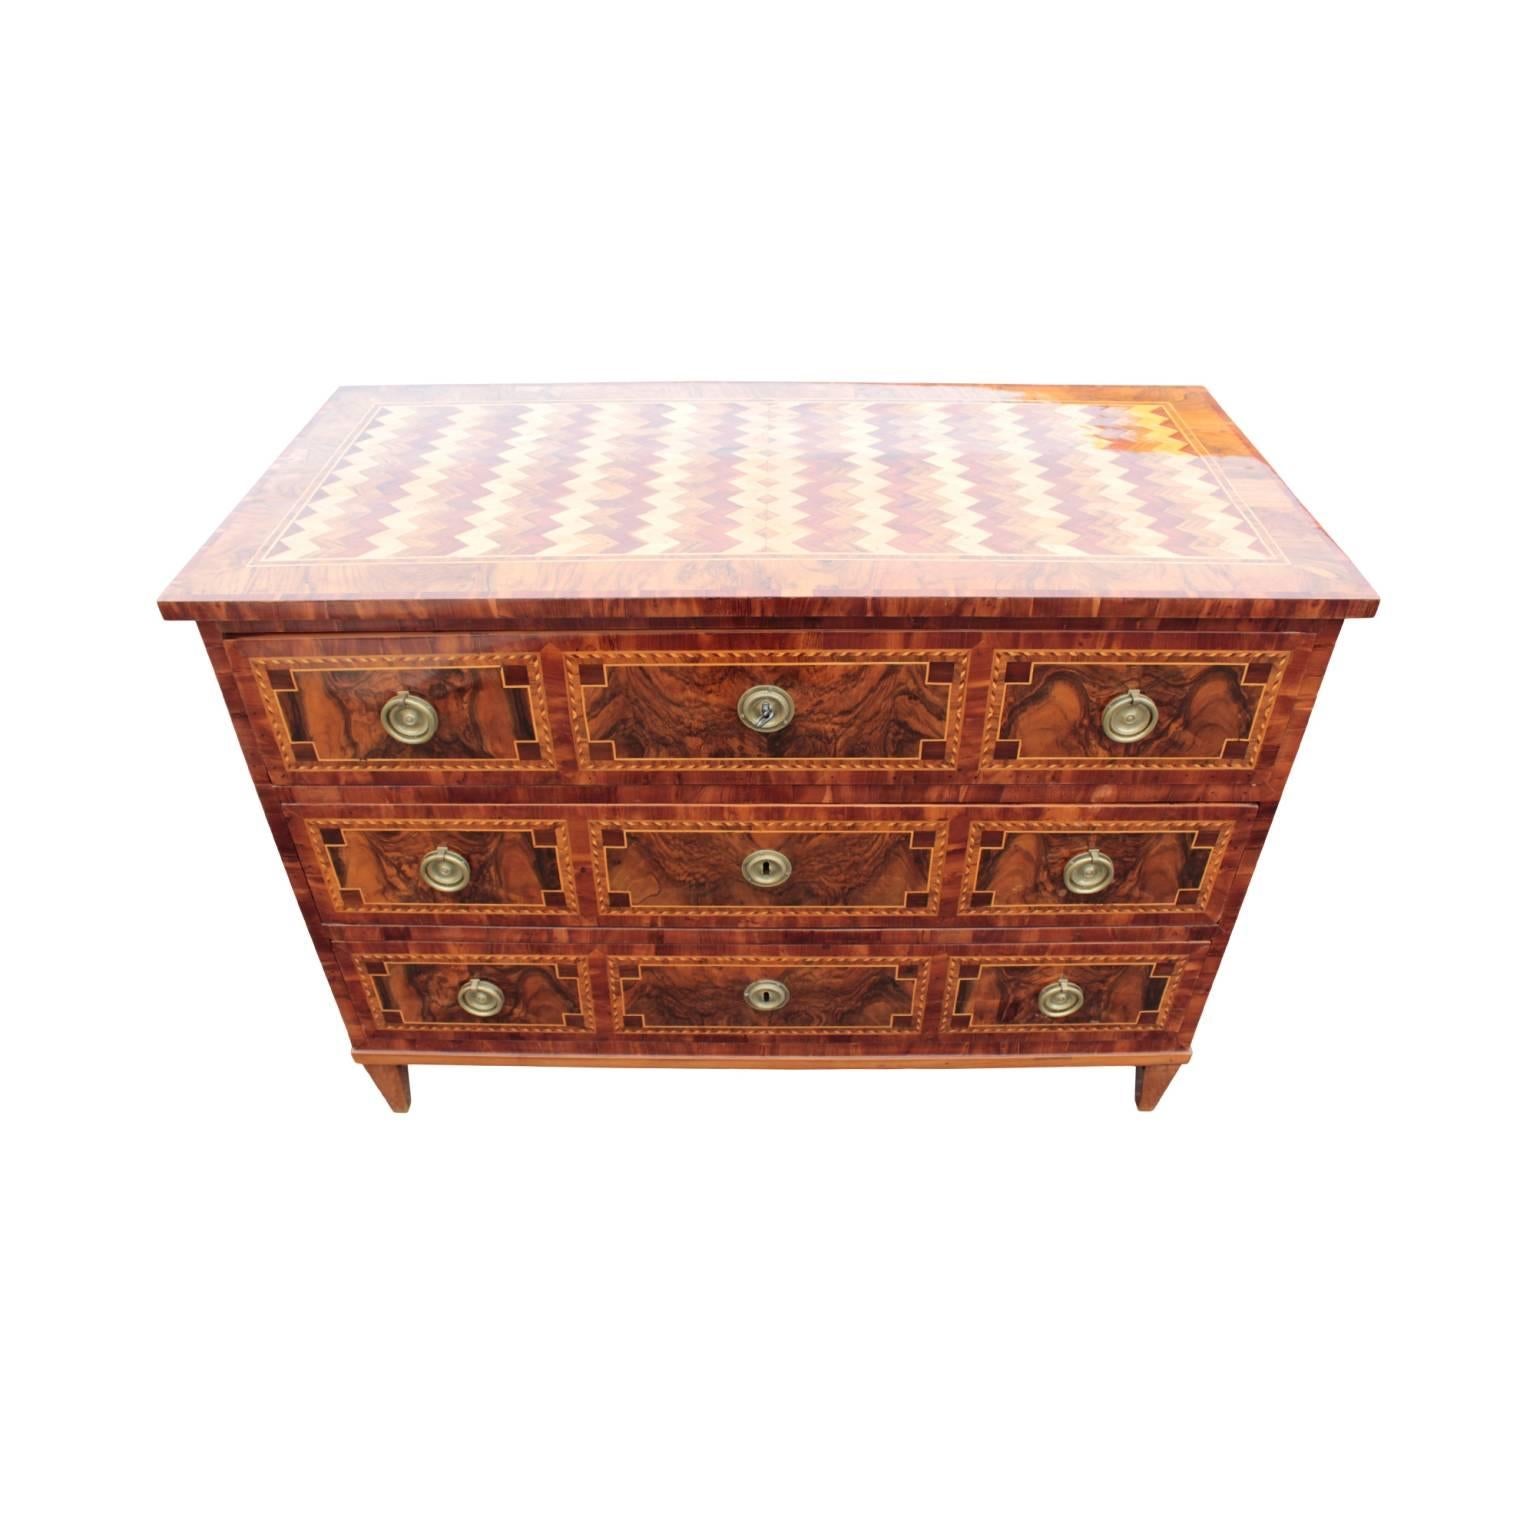 Superb South German or Austrian Neoclassical Chest of Drawers In Excellent Condition For Sale In Hudson, NY